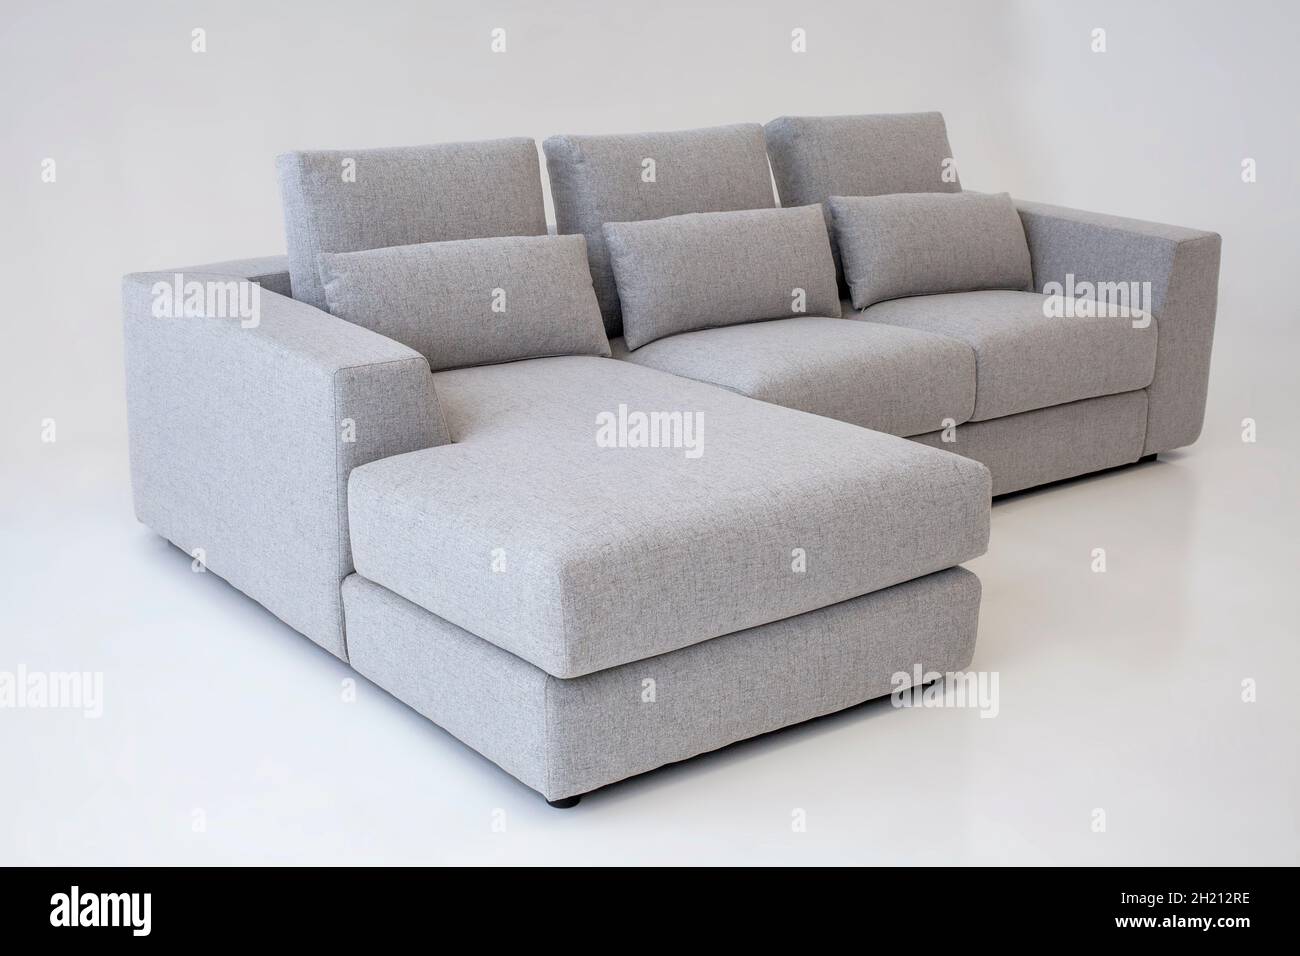 modern angle couch in light gray color Stock Photo